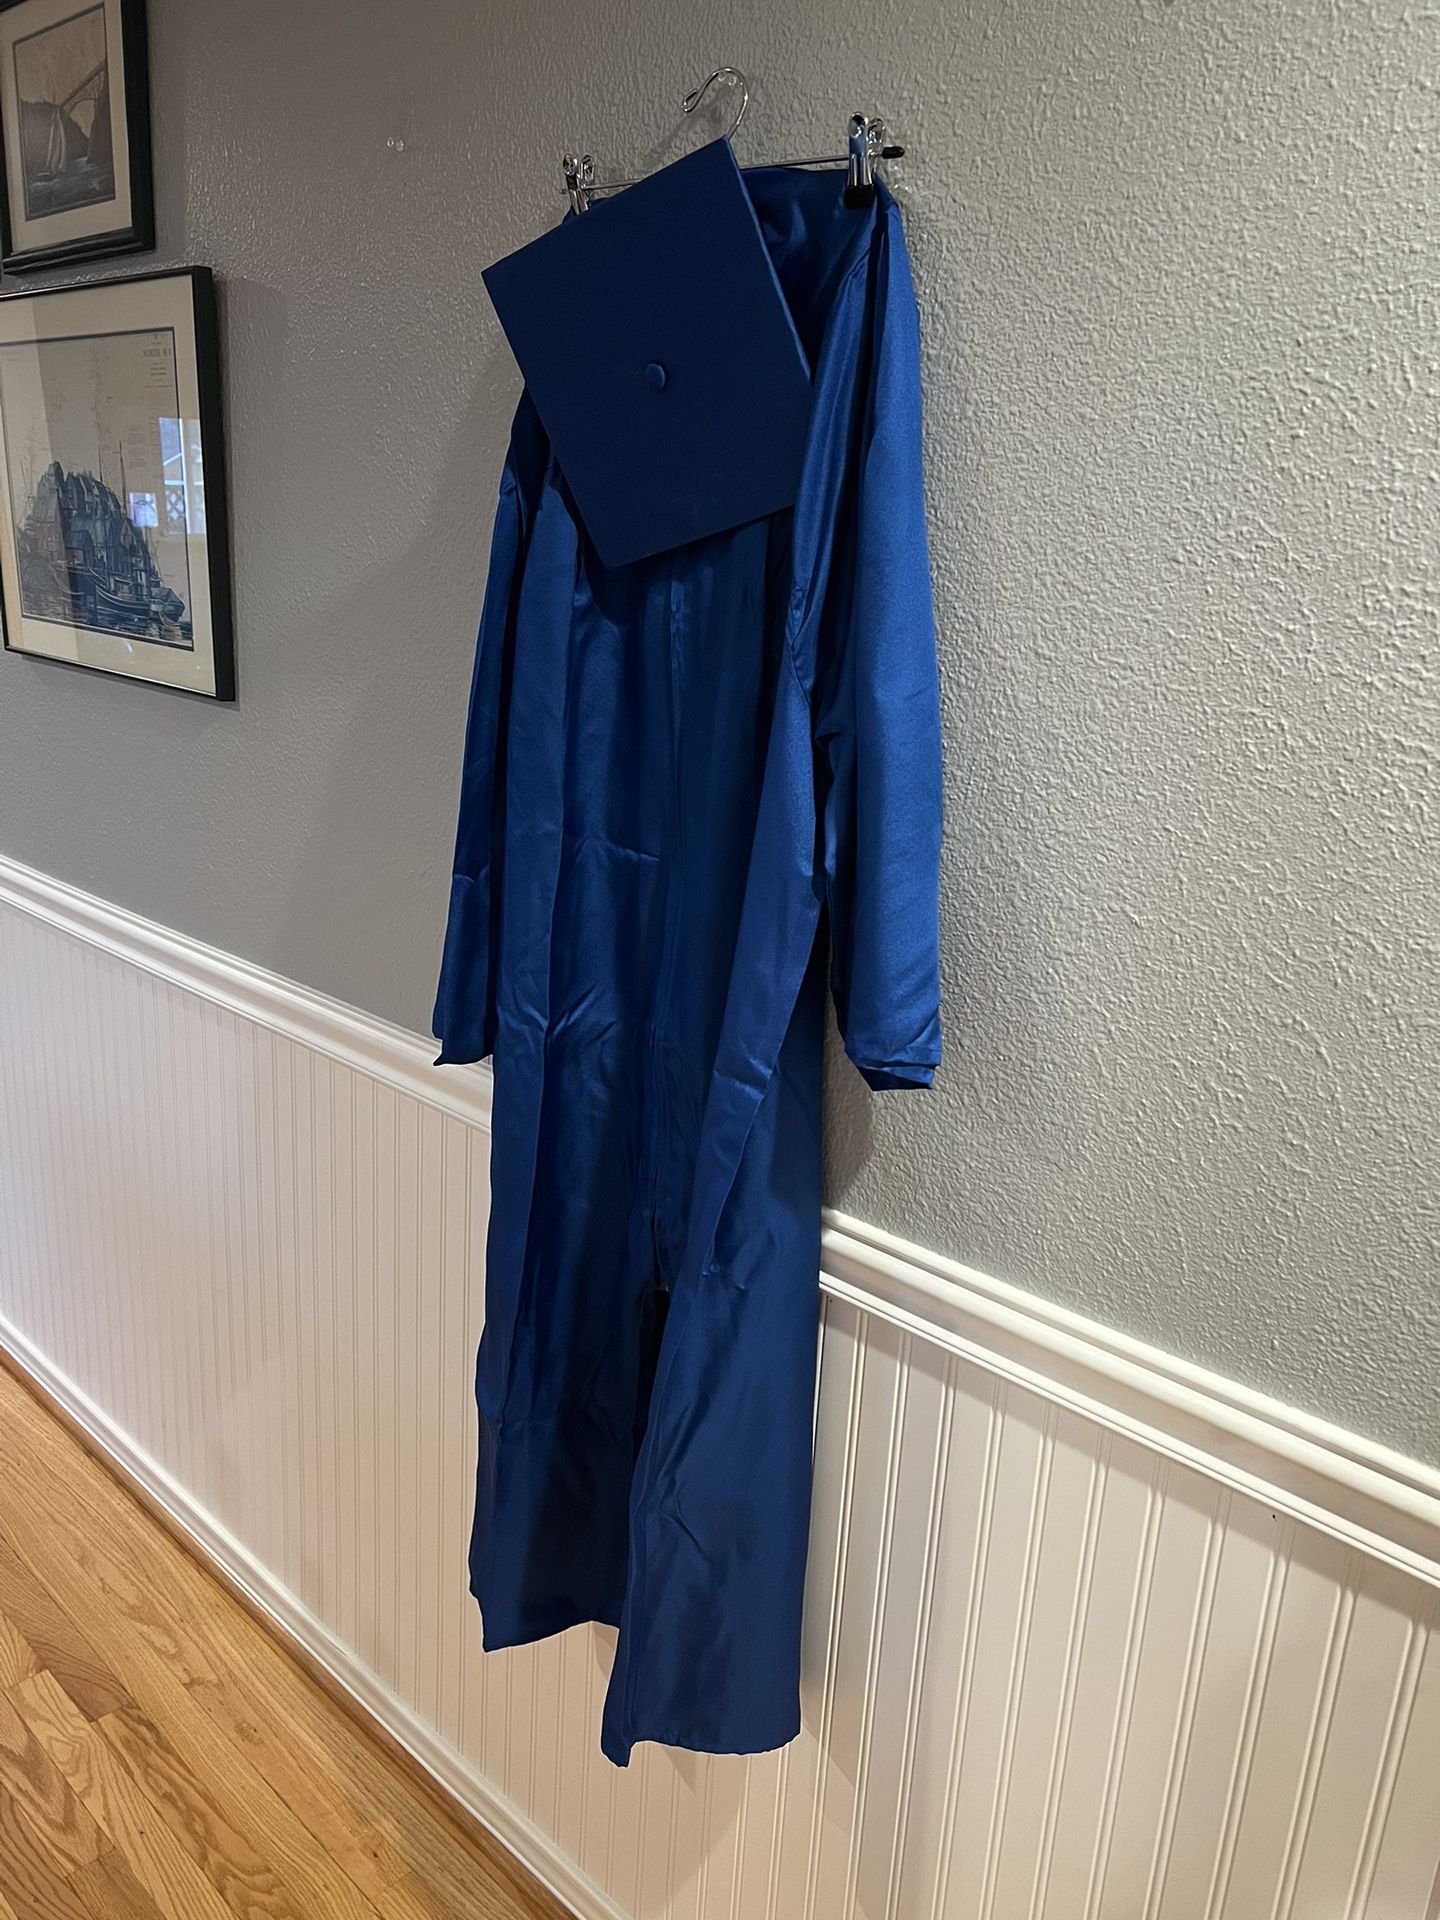 Blue Graduation Gown And Cap -Fits A Person 5’7-5’9”